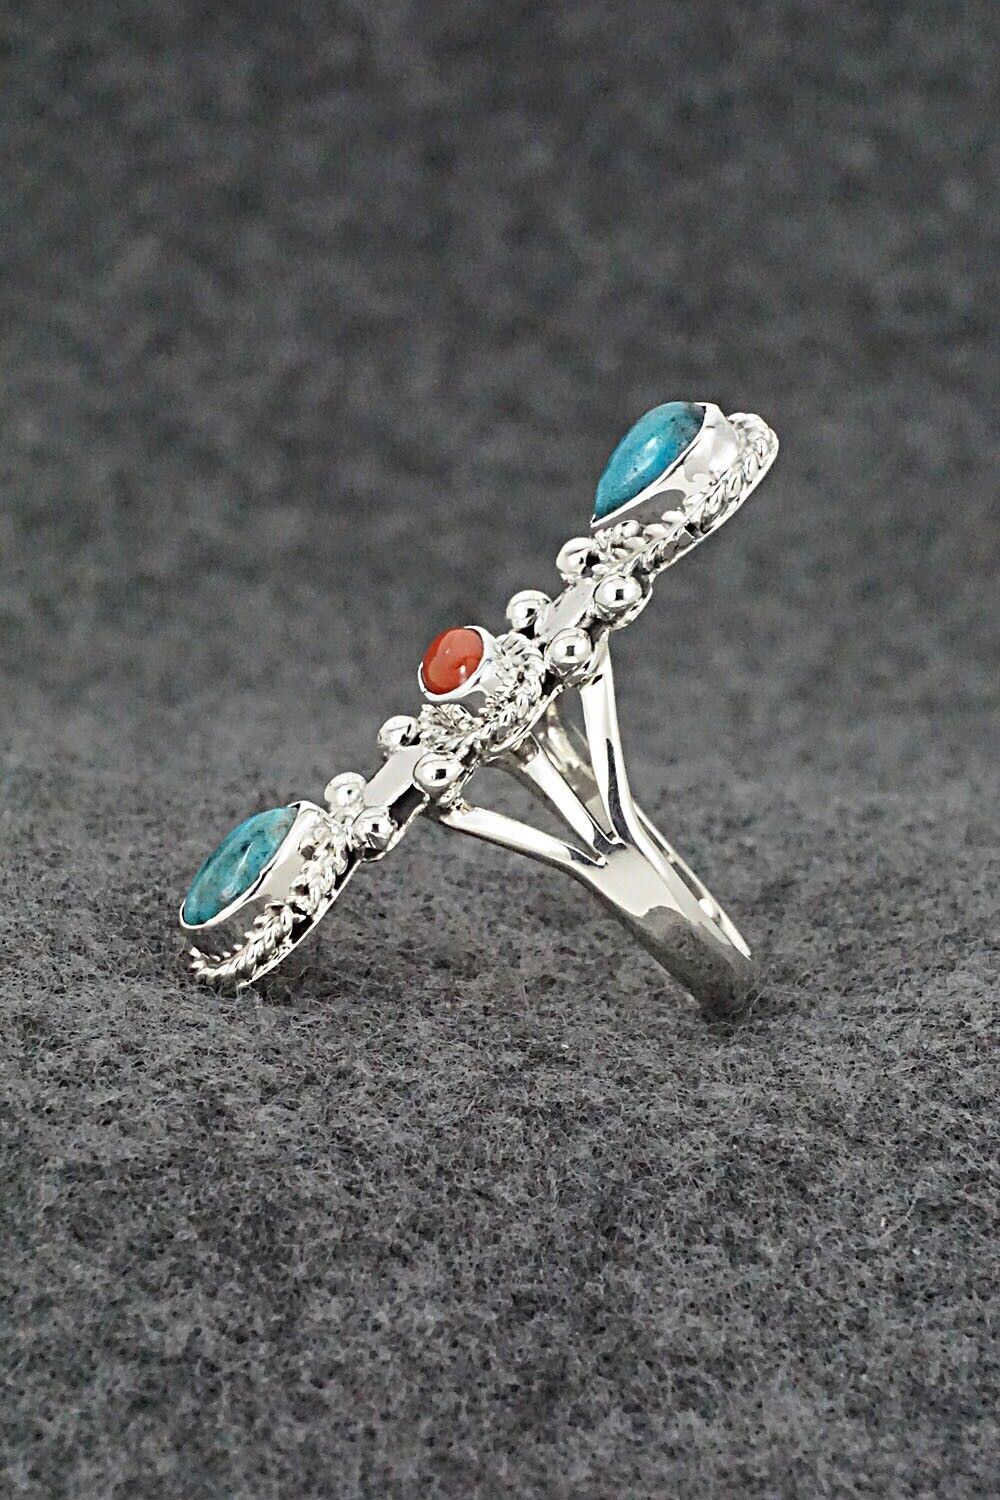 Turquoise, Coral & Sterling Silver Ring - Andrew Vandever - Size 7